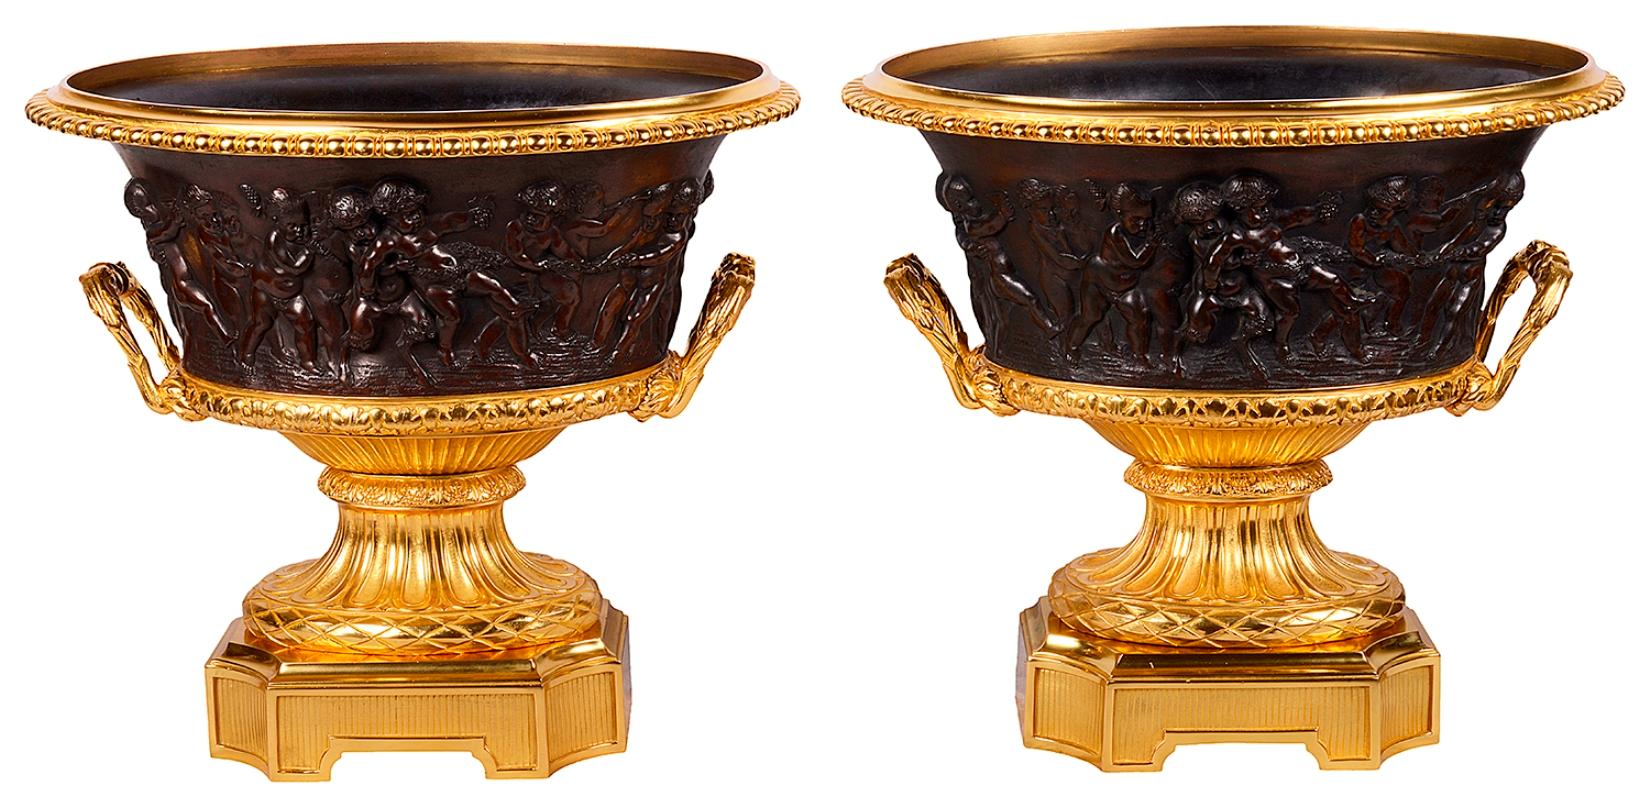 A very impressive pair of 19th century French, Grand Tour gilded ormolu and patinated bronze Campana Urns. Each with wonderful classical scenes of frolicking Bacchus Putti in bronze, raised on fluted and chased ormolu pedestals and handles to either